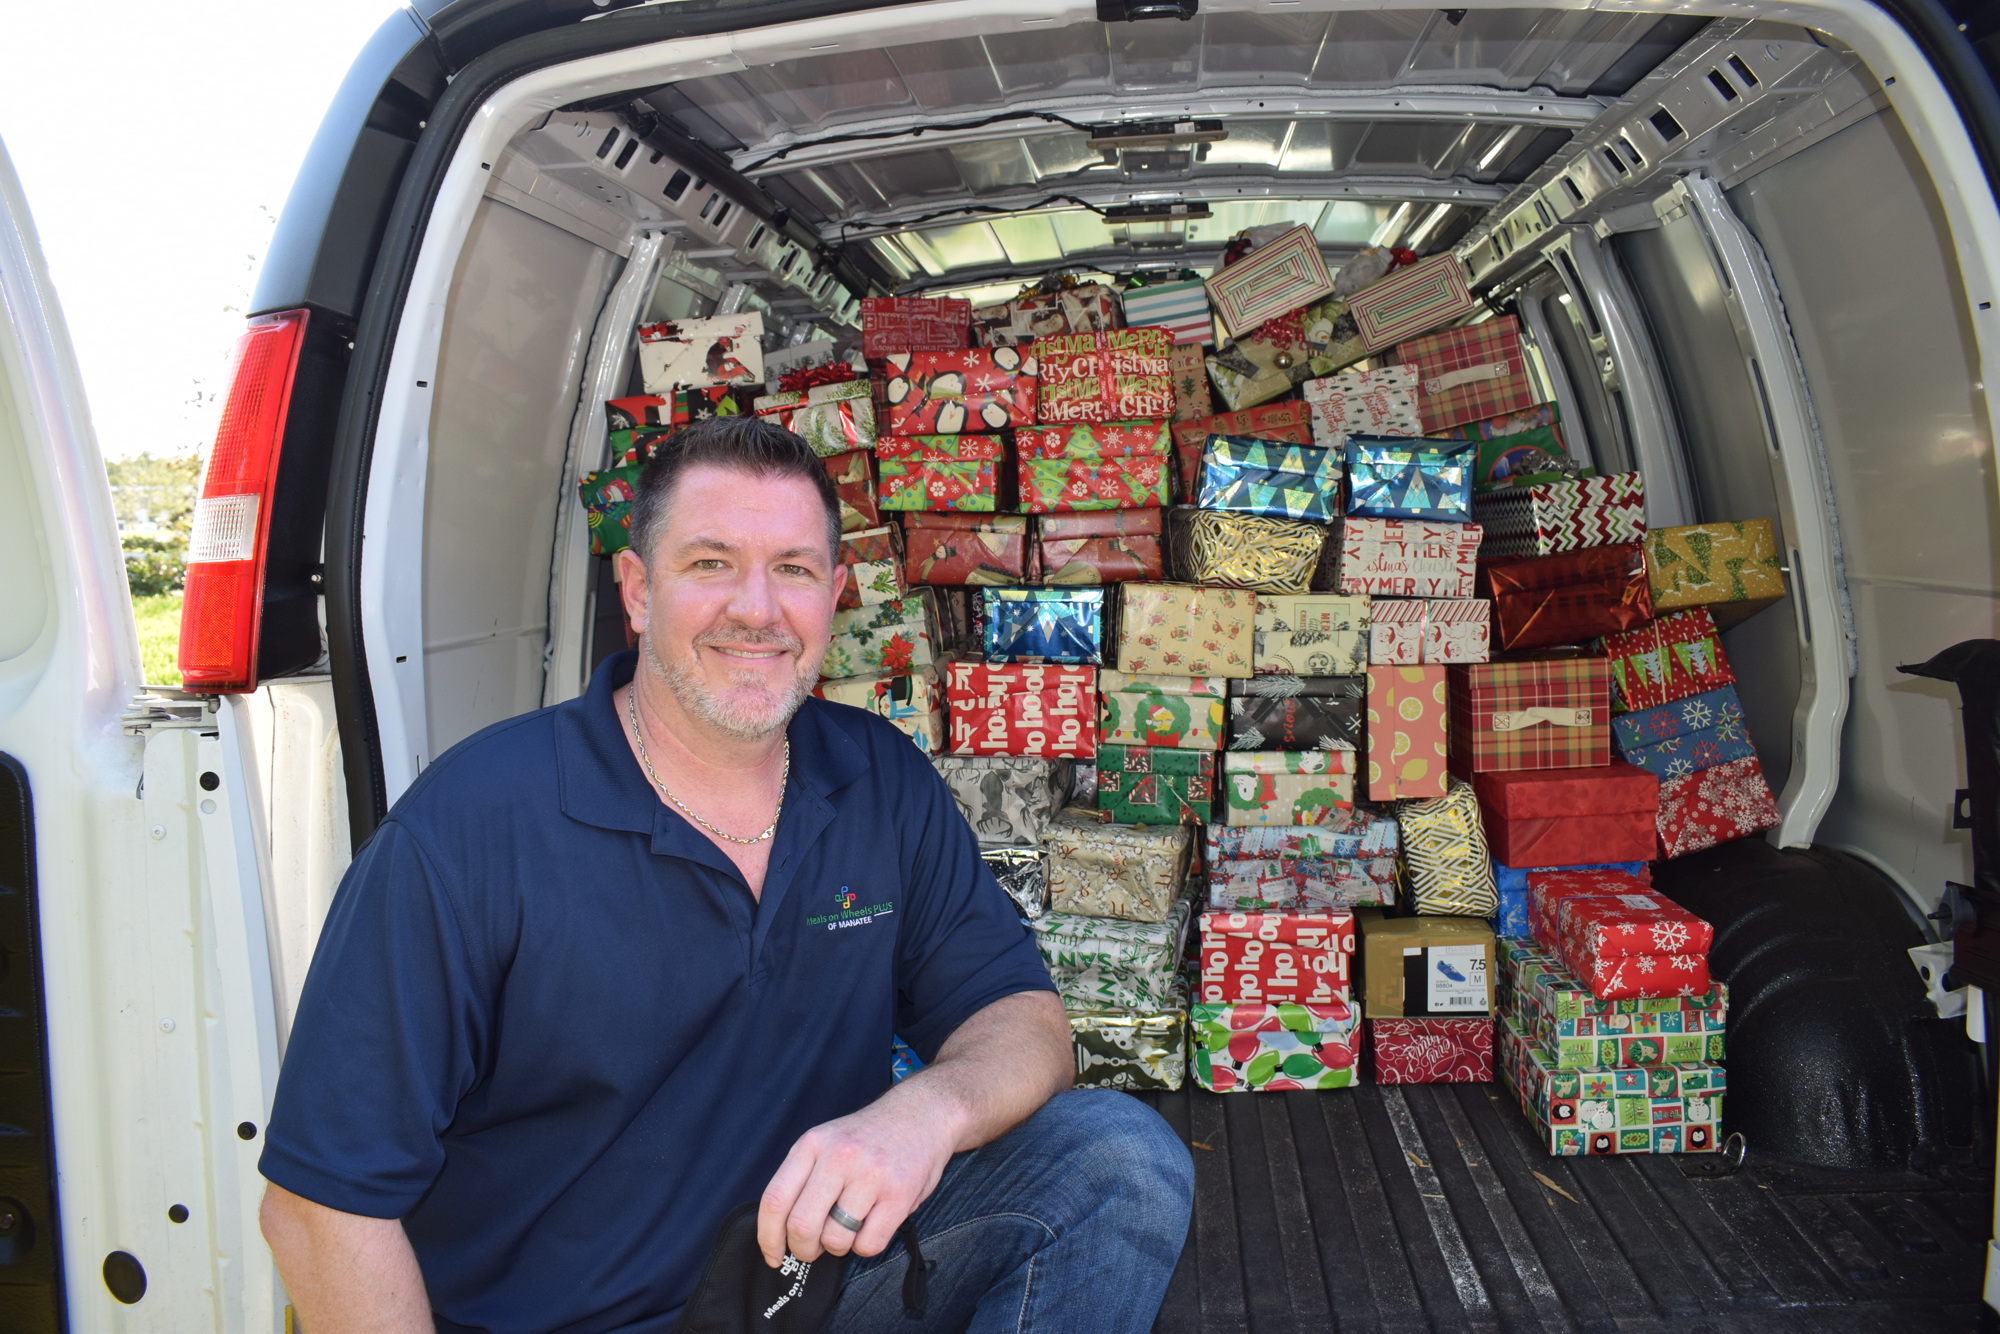 Bryan Lipps, the vice president of strategic programs for Meals on Wheels Plus, takes a break from packing shoebox donations into a van.